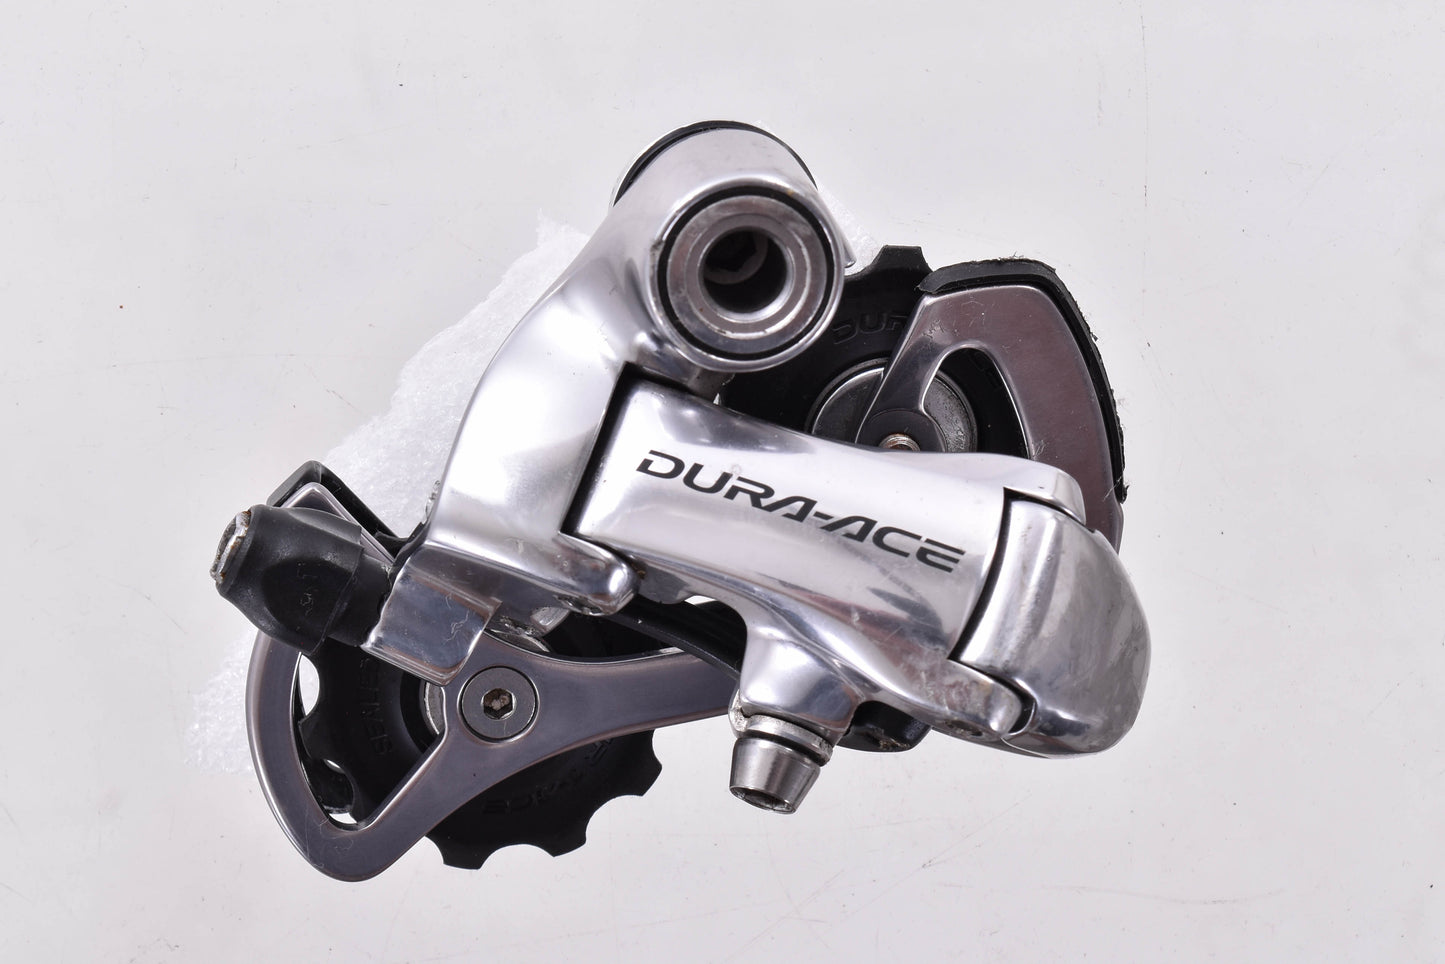 USED Shimano Dura-Ace 7800 2x10 speed TT Groupset Bar End Shifters, Brake Calipers Derailleurs Cassette